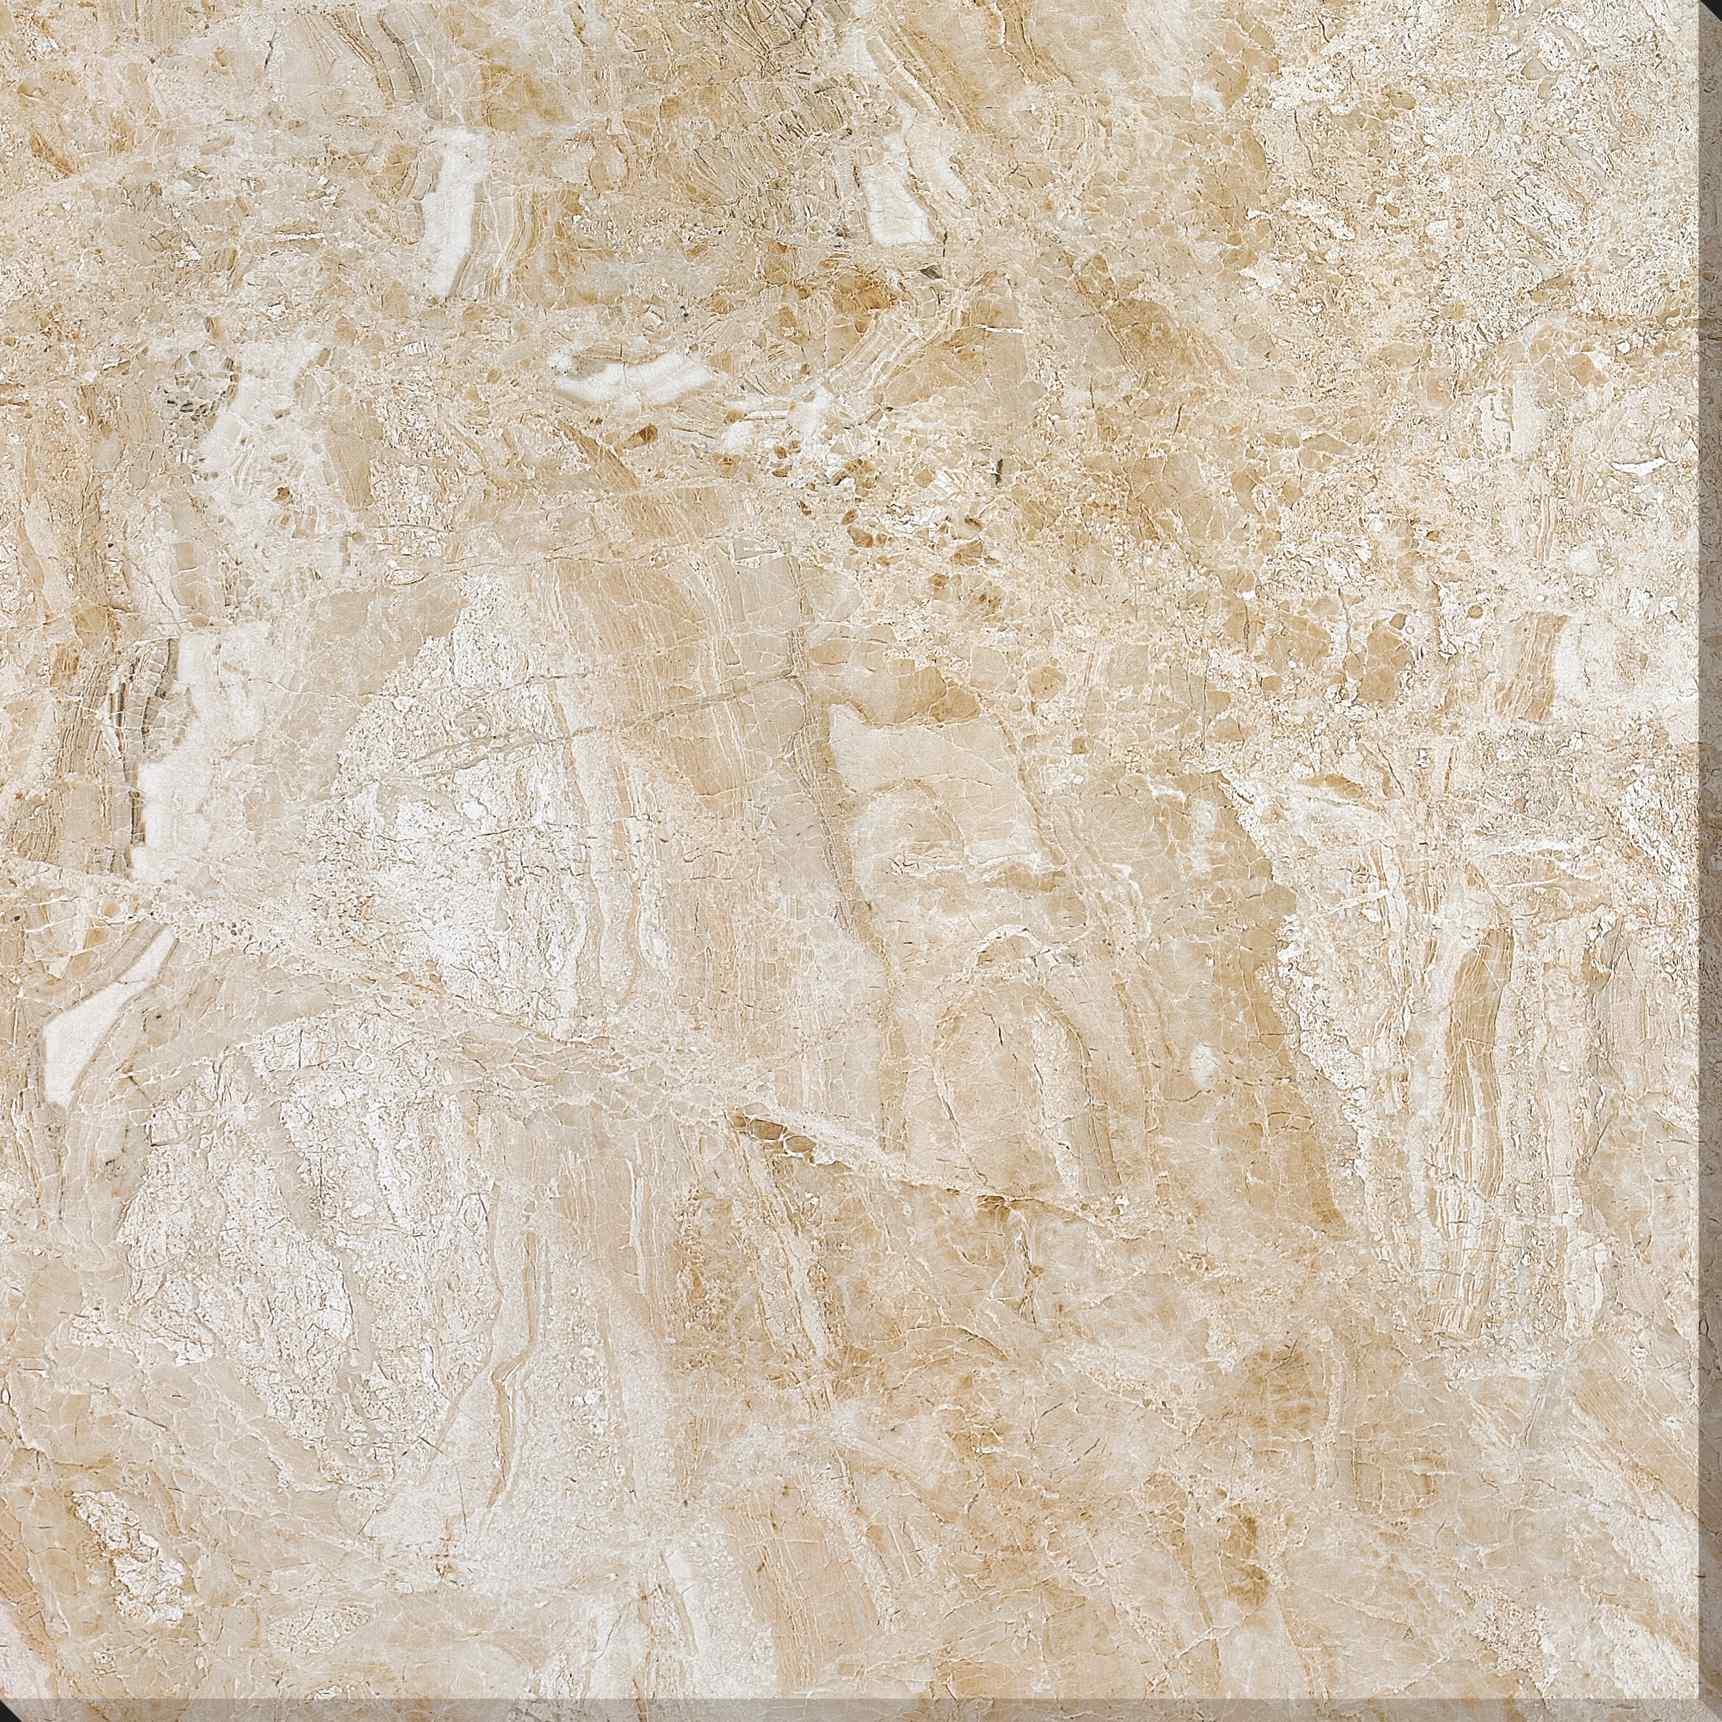 Cappuccino marble tile Full polished marble tiles cloud series VPM6161S 60x60 80x80cm